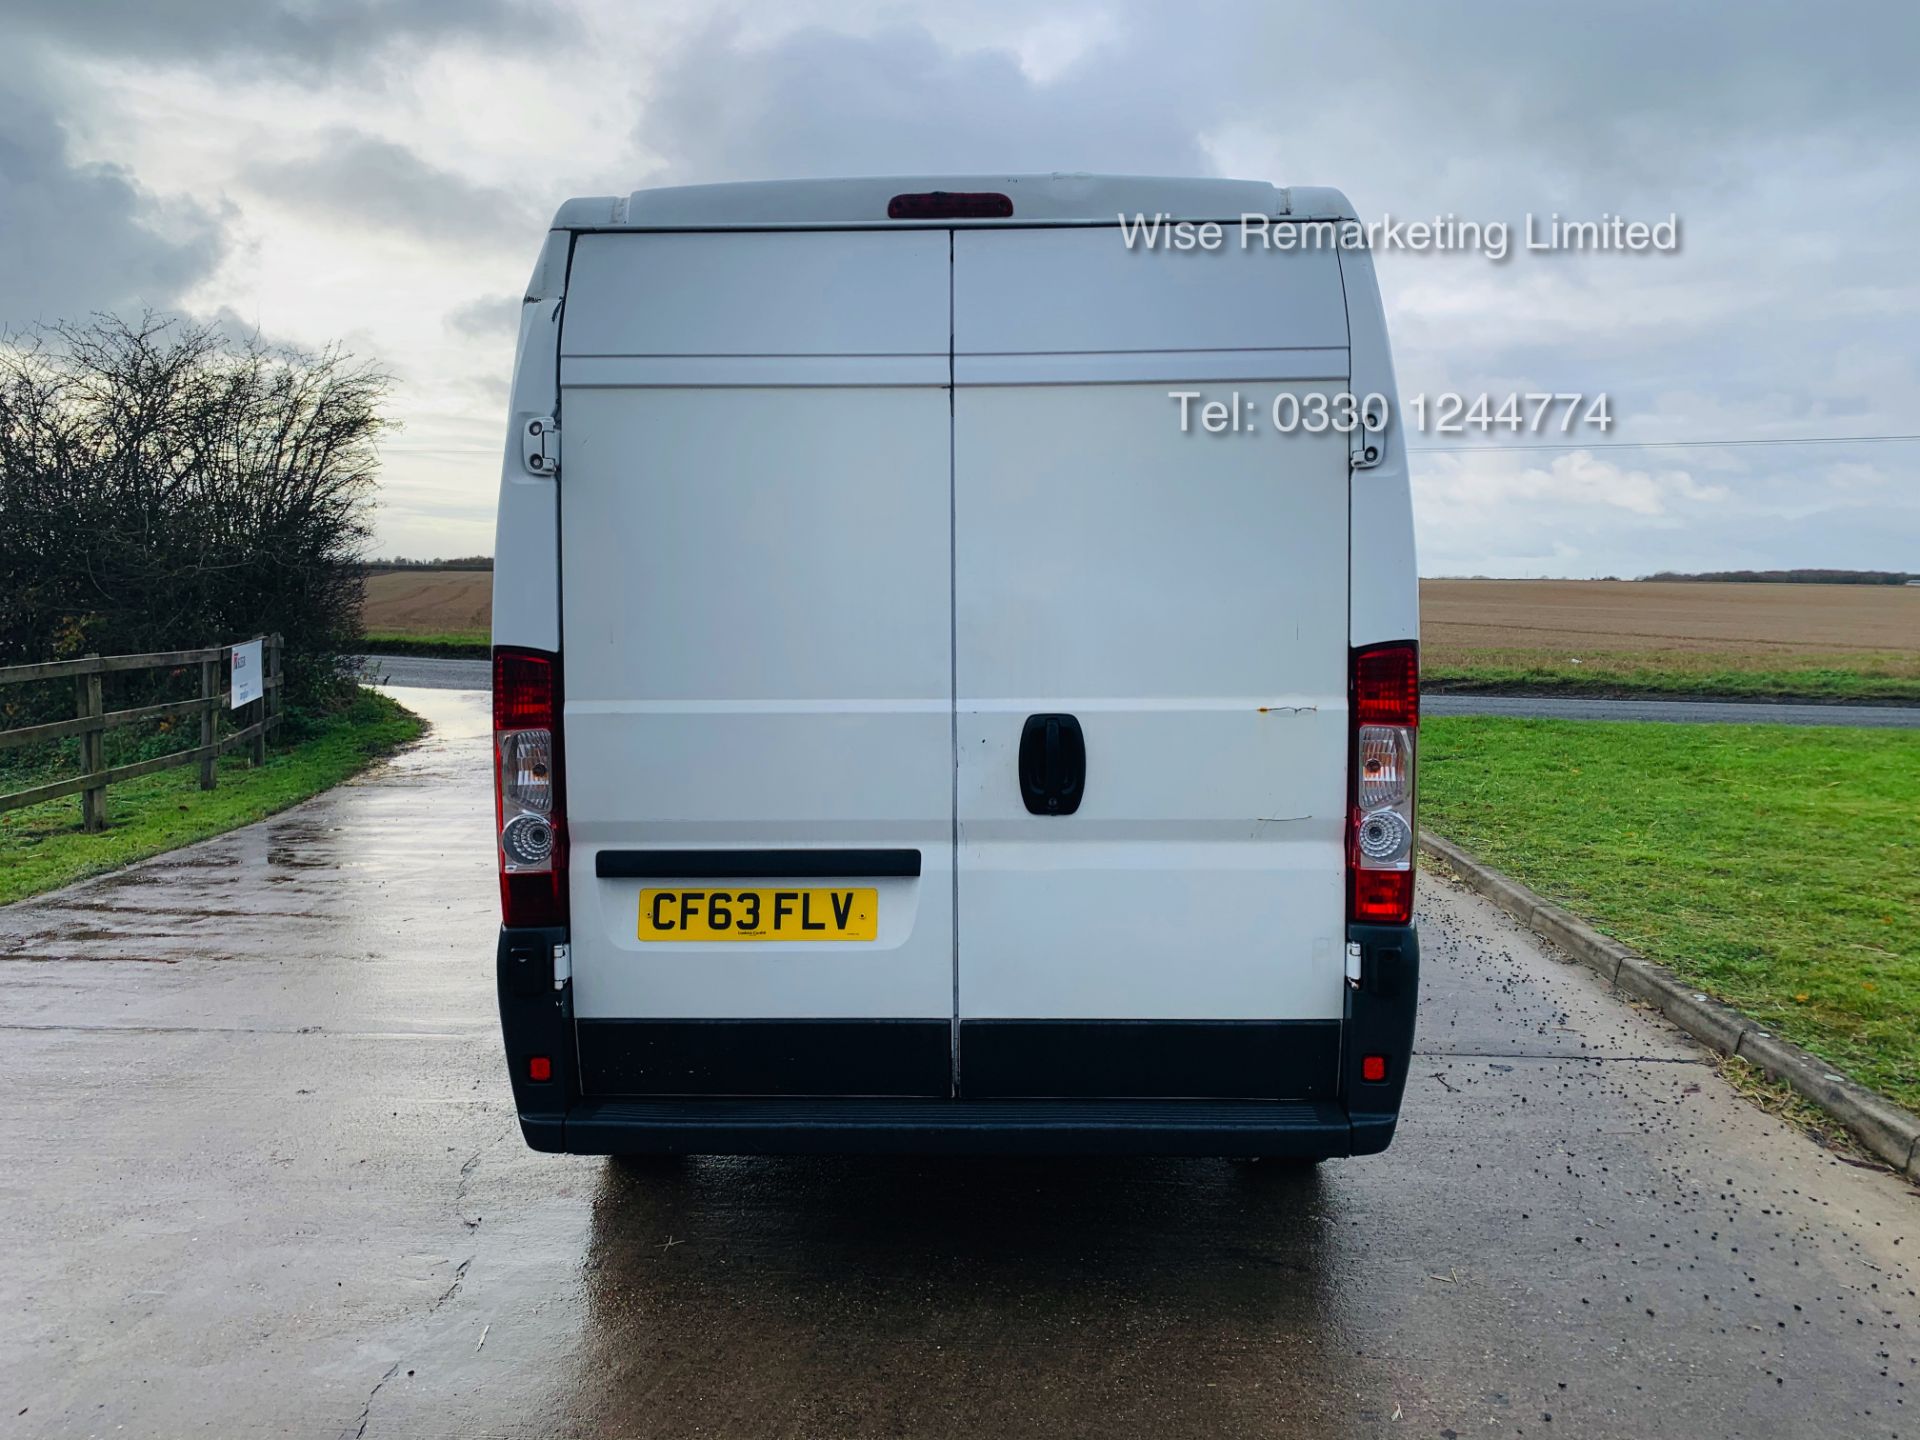 Peugeot Boxer 335 2.2 HDi (L3H2) 2014 Model - 1 Keeper From New - Long Wheel Base - Image 4 of 17